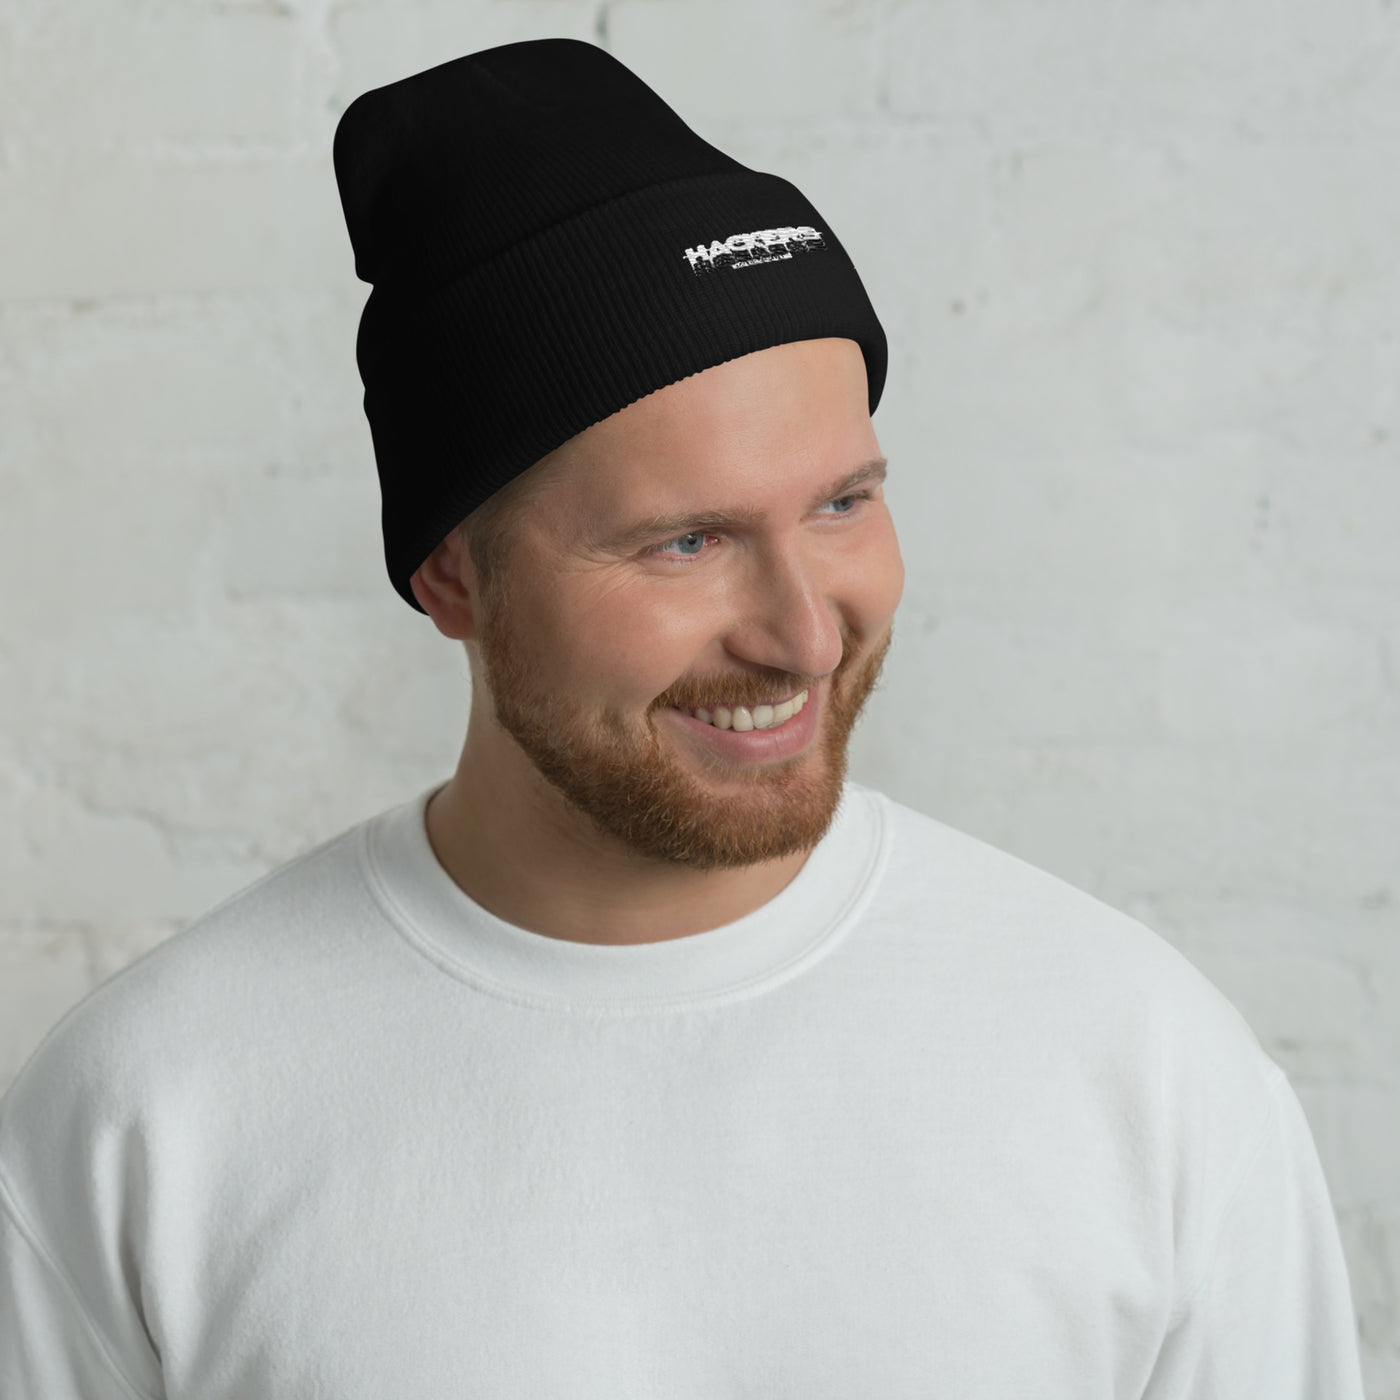 Hackers Empower Hackers V3 - Cuffed Beanie